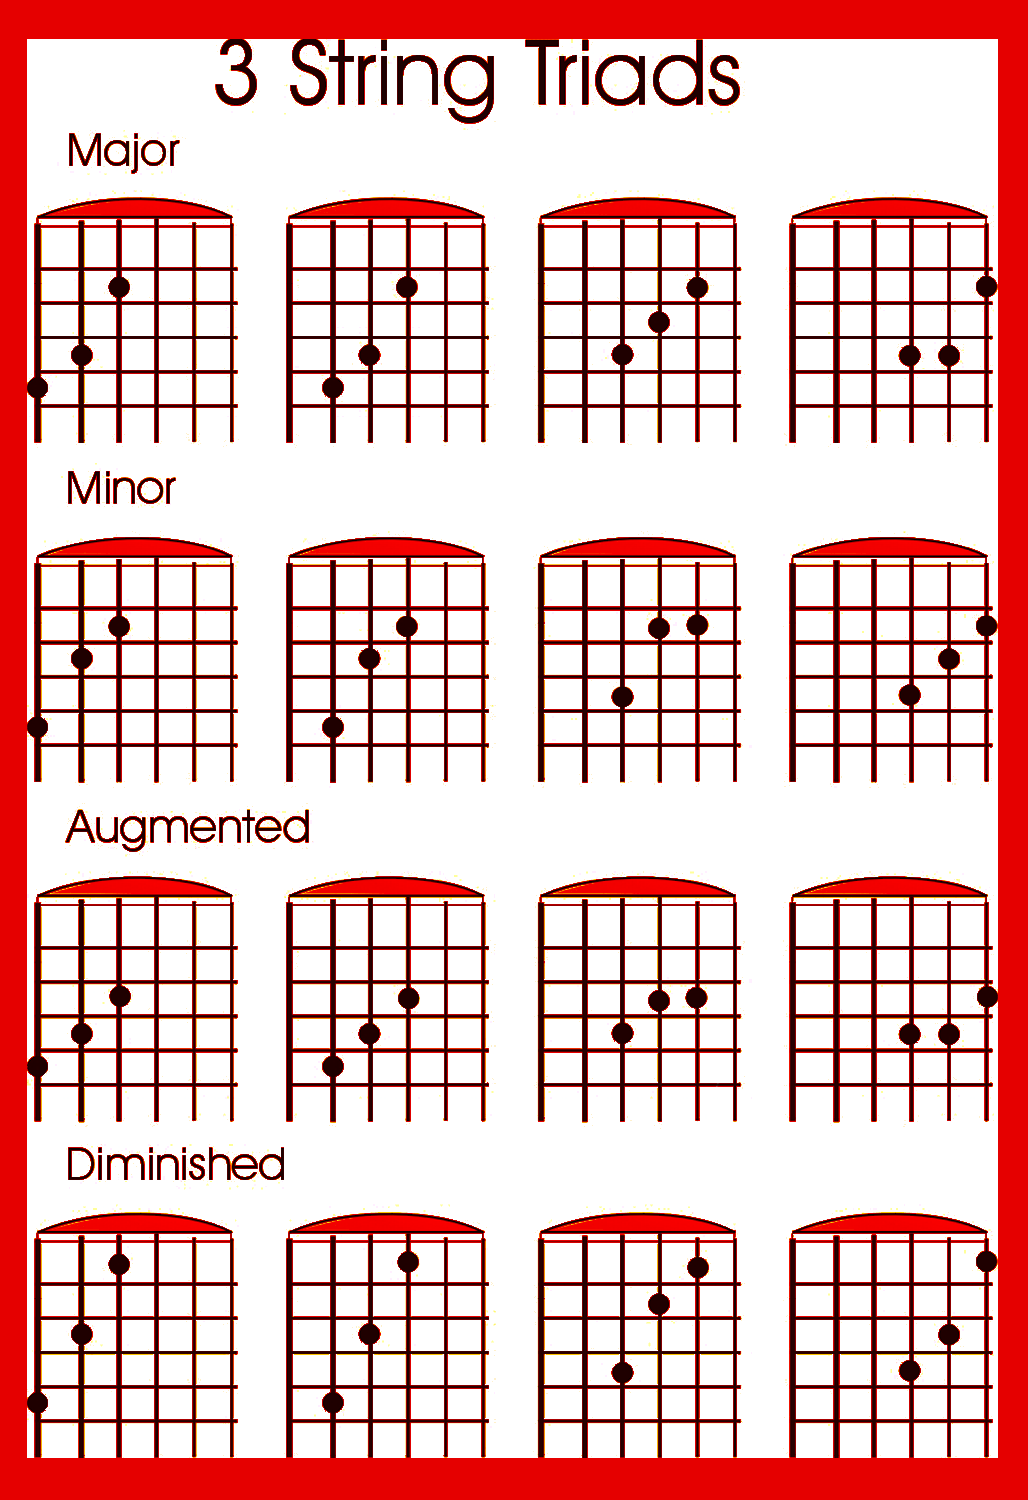 Tips to Learn the guitar fretboard